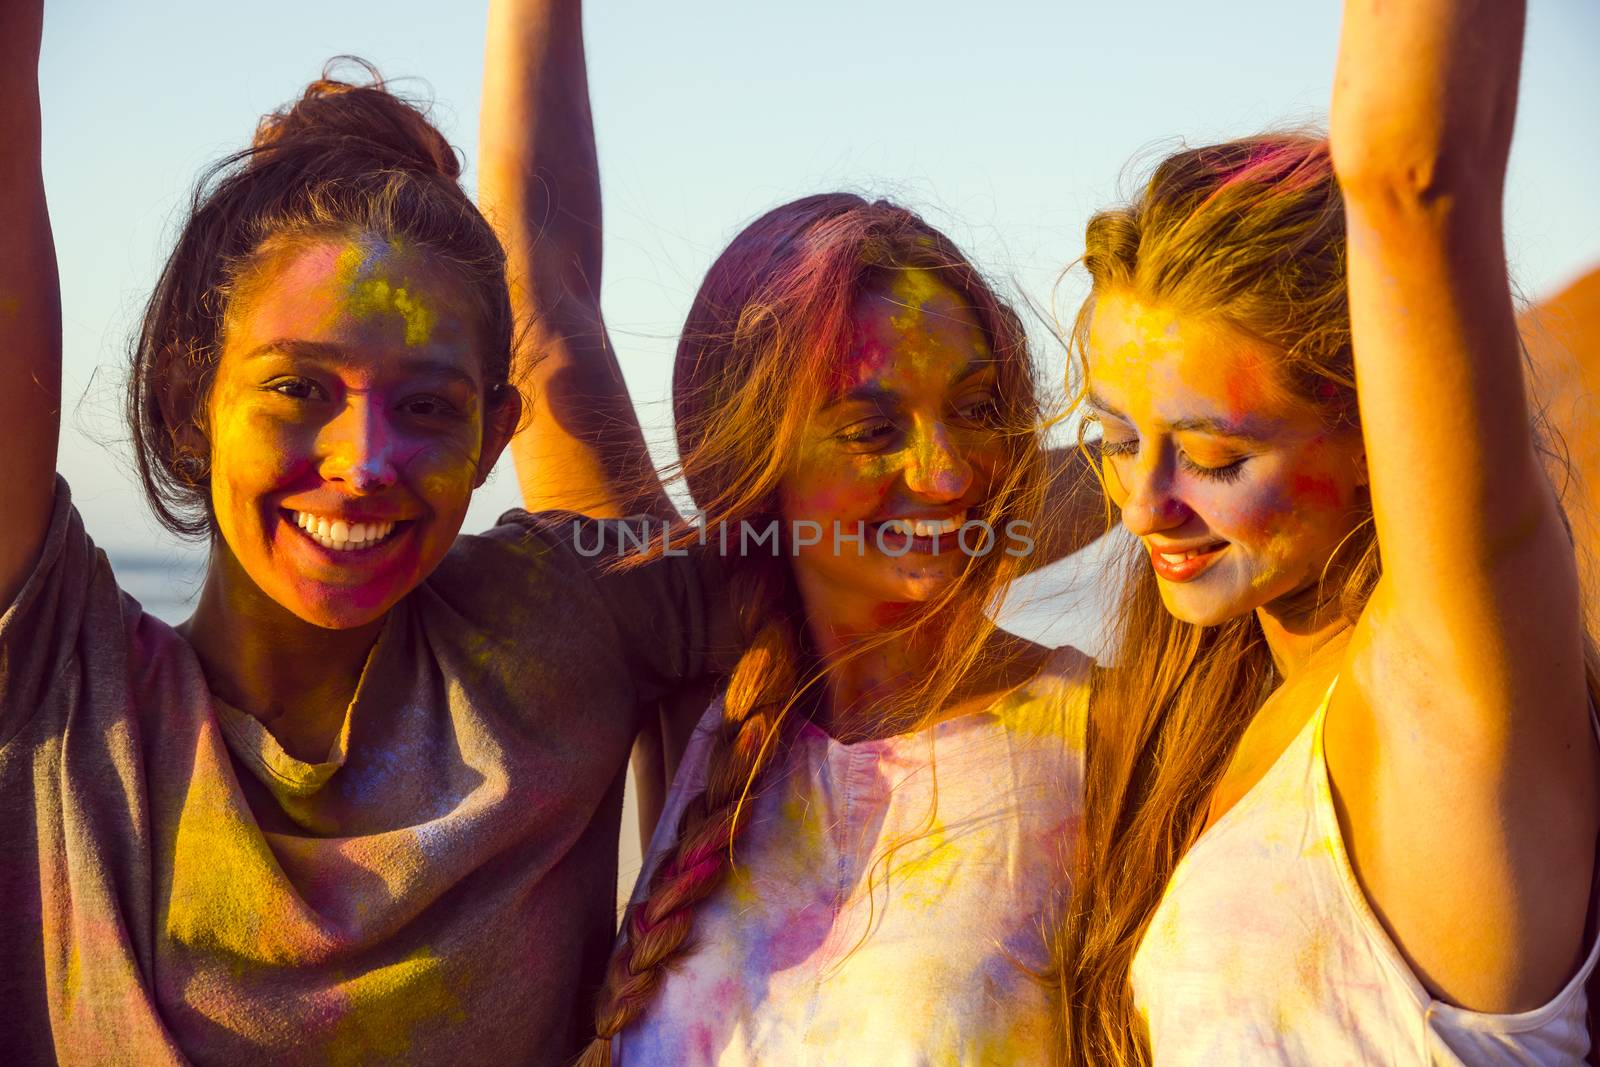 Teenagers playing with colored powder on the beach